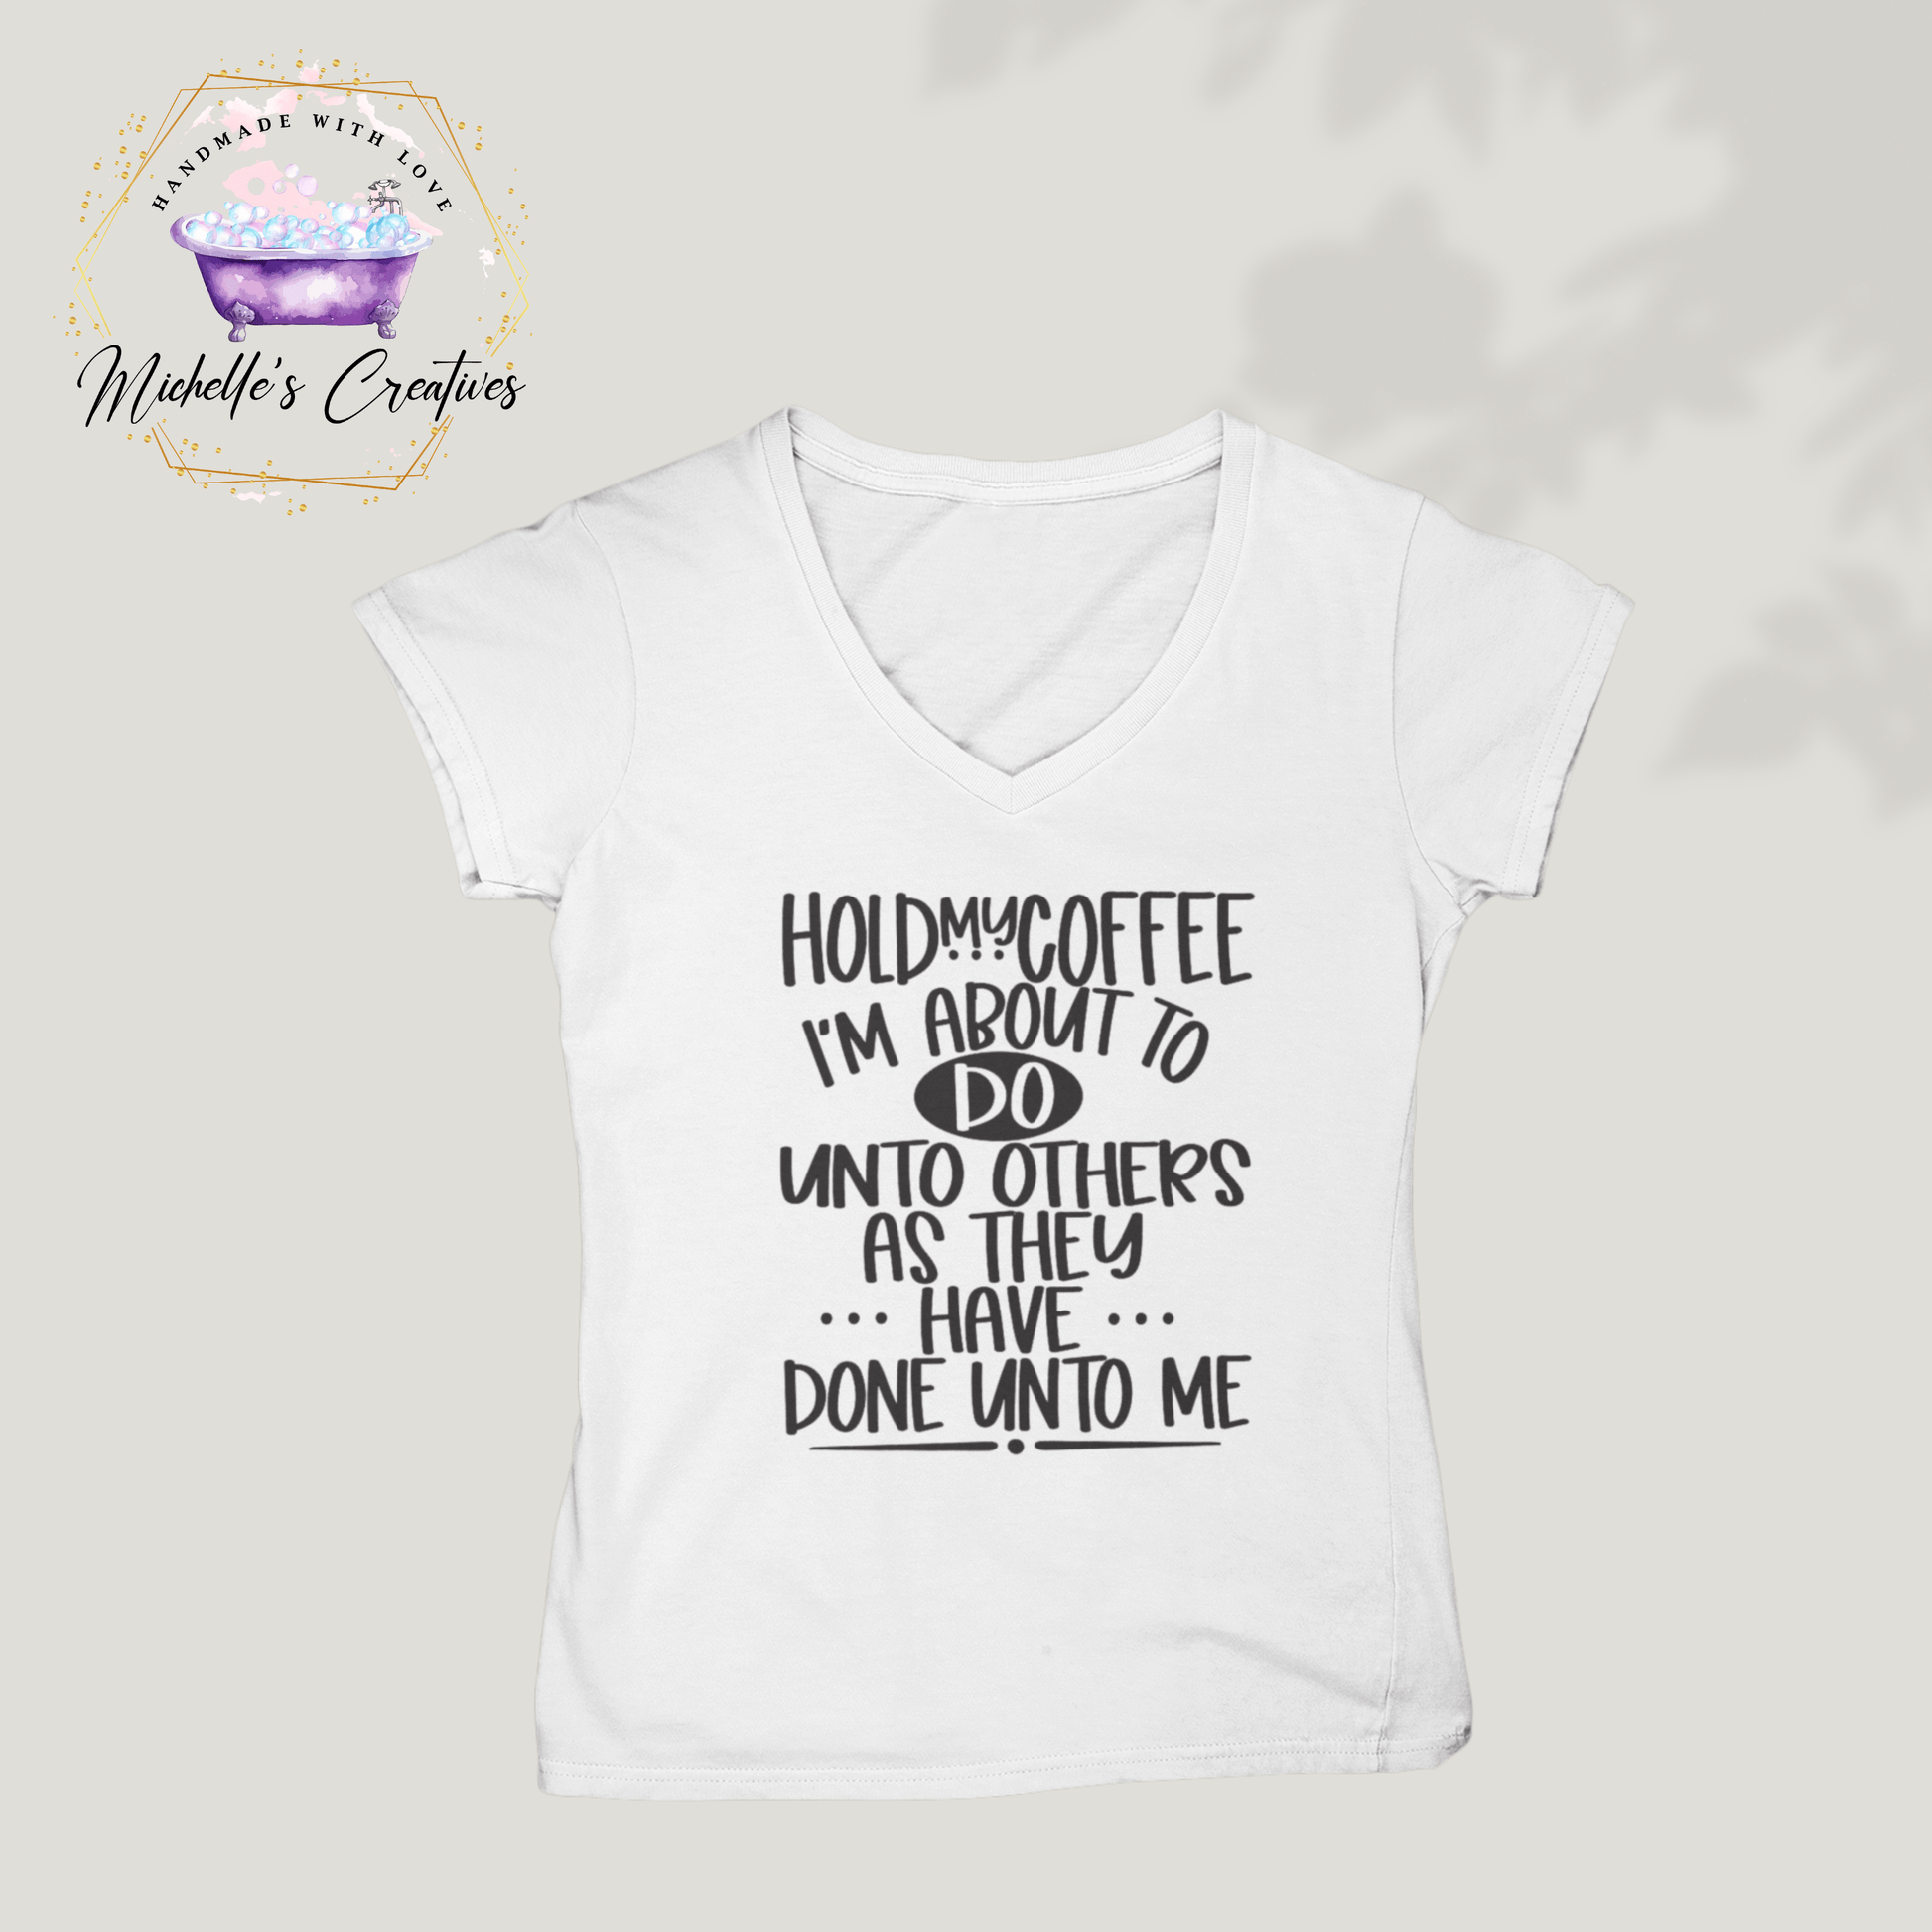 Michelle's Creatives T-shirt Small / White ☕ "Hold My Coffee I'm About To DO unto Others As They Have Done Unto Me" 👕 V-Neck Unisex T-Shirt HOLD-MY-COFFEE-V-NECK-2